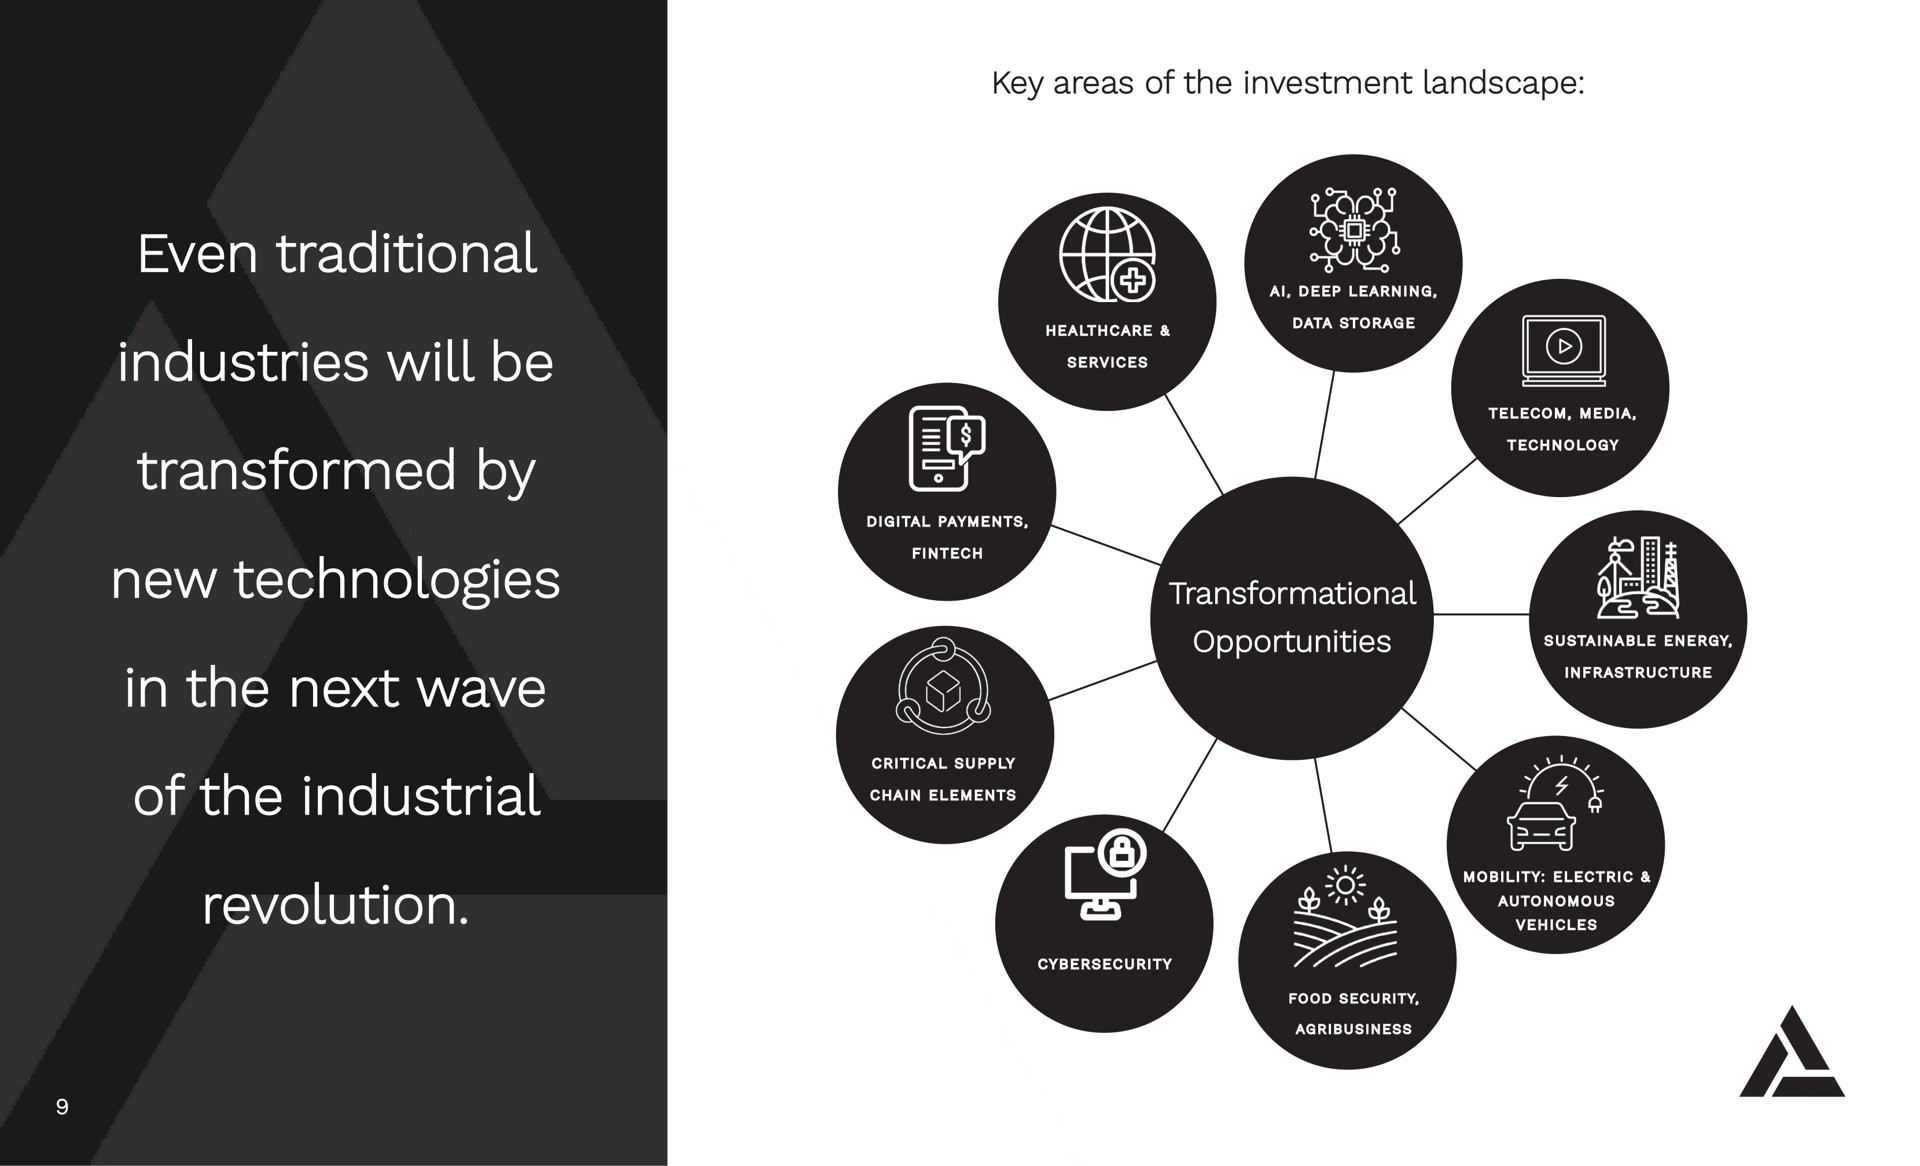 even traditional even traditional industries will be industries will be transformed by transformed by new technologies new technologies in the next wave in the next wave of the industrial of the industrial revolution revolution | Affinity Partners